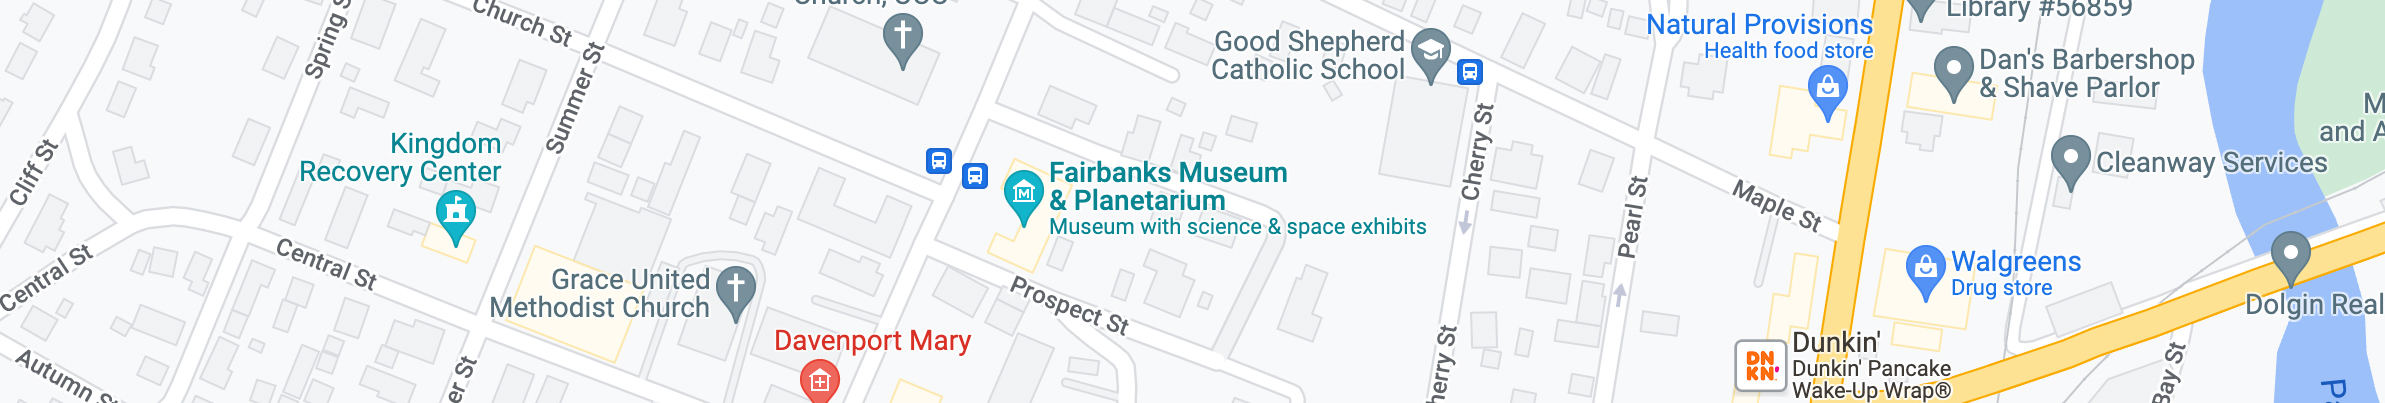 Google Map image of the Fairbanks Museum